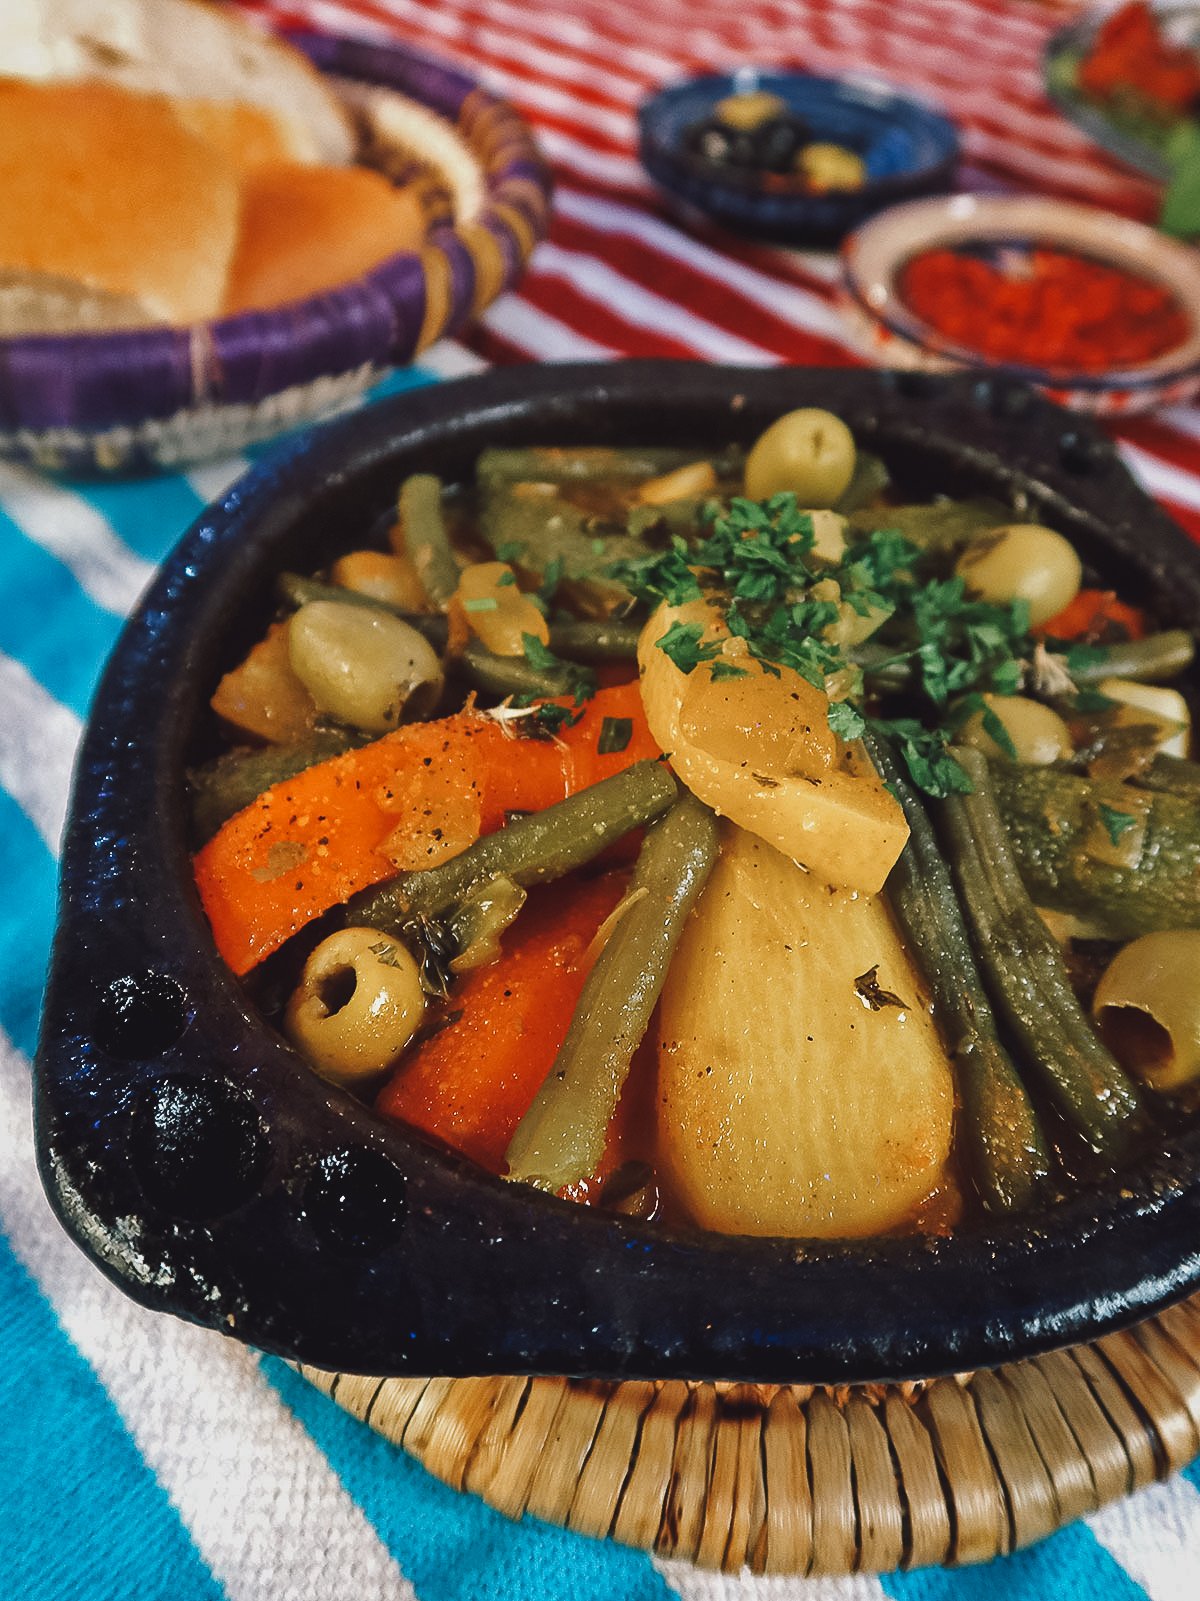 Vegetable tagine at a restaurant in Tangier